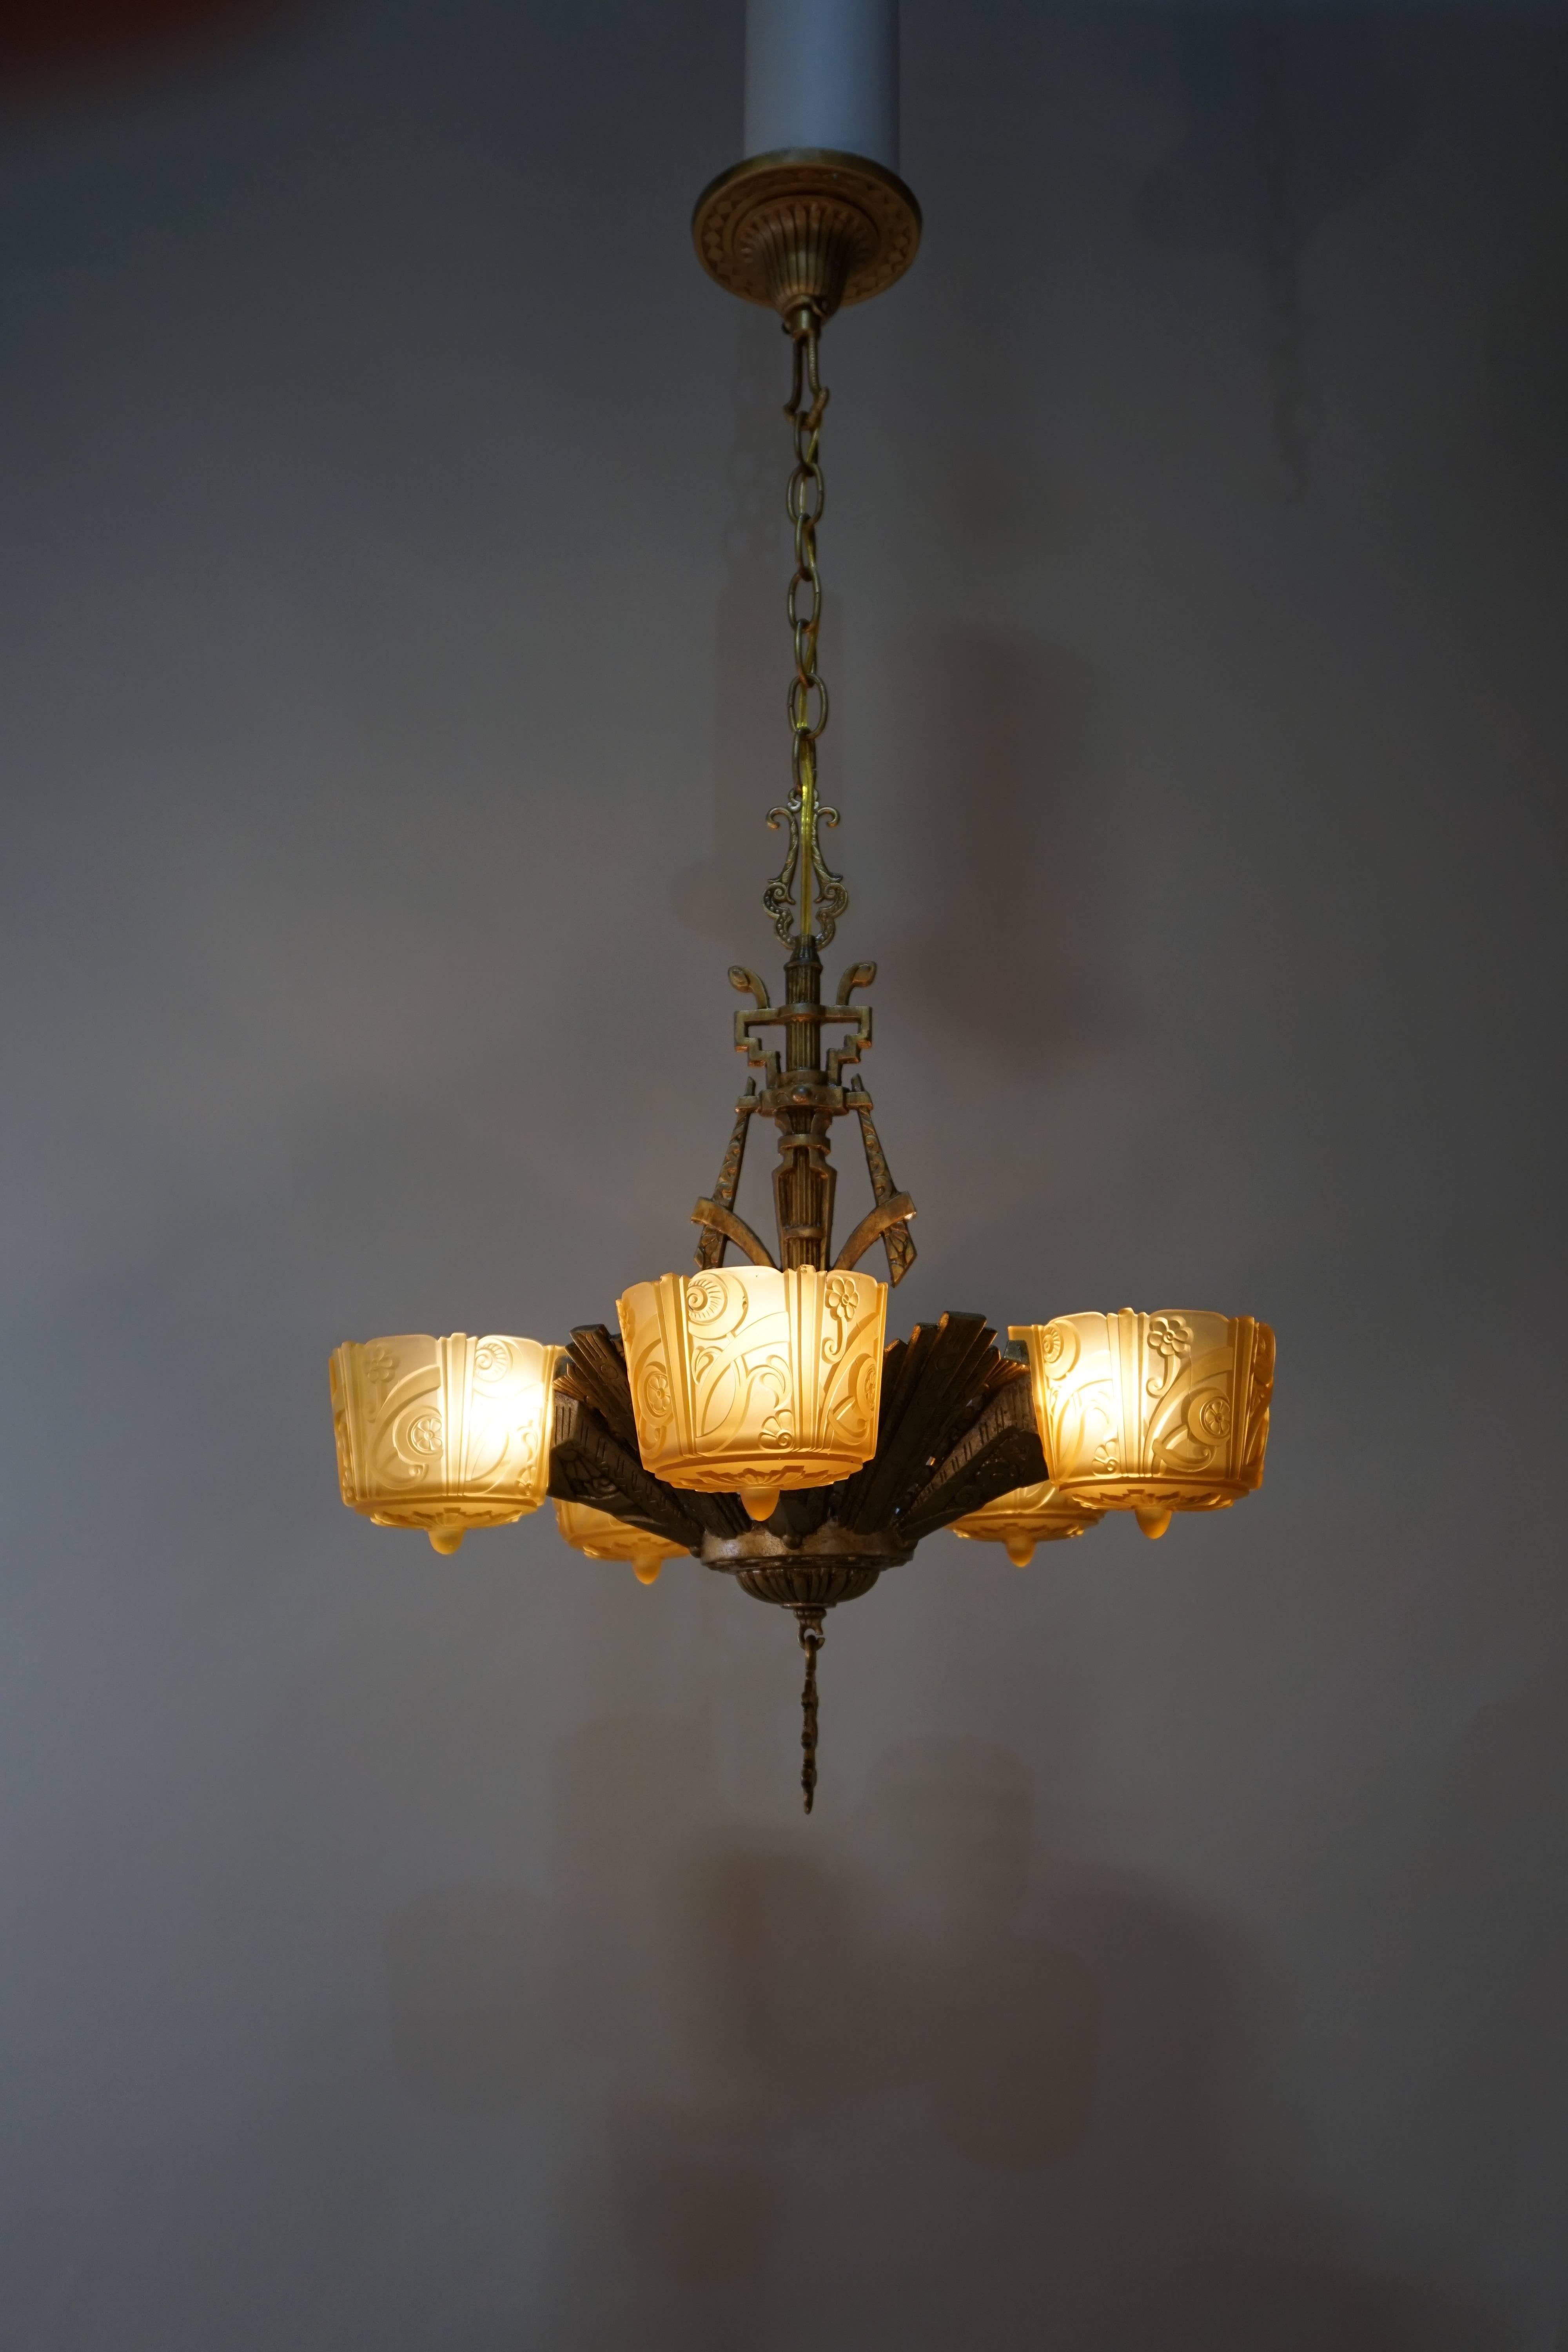 Mid-20th Century American Five-Light Amber Glass Chandelier by Riddle Lighting Co. 